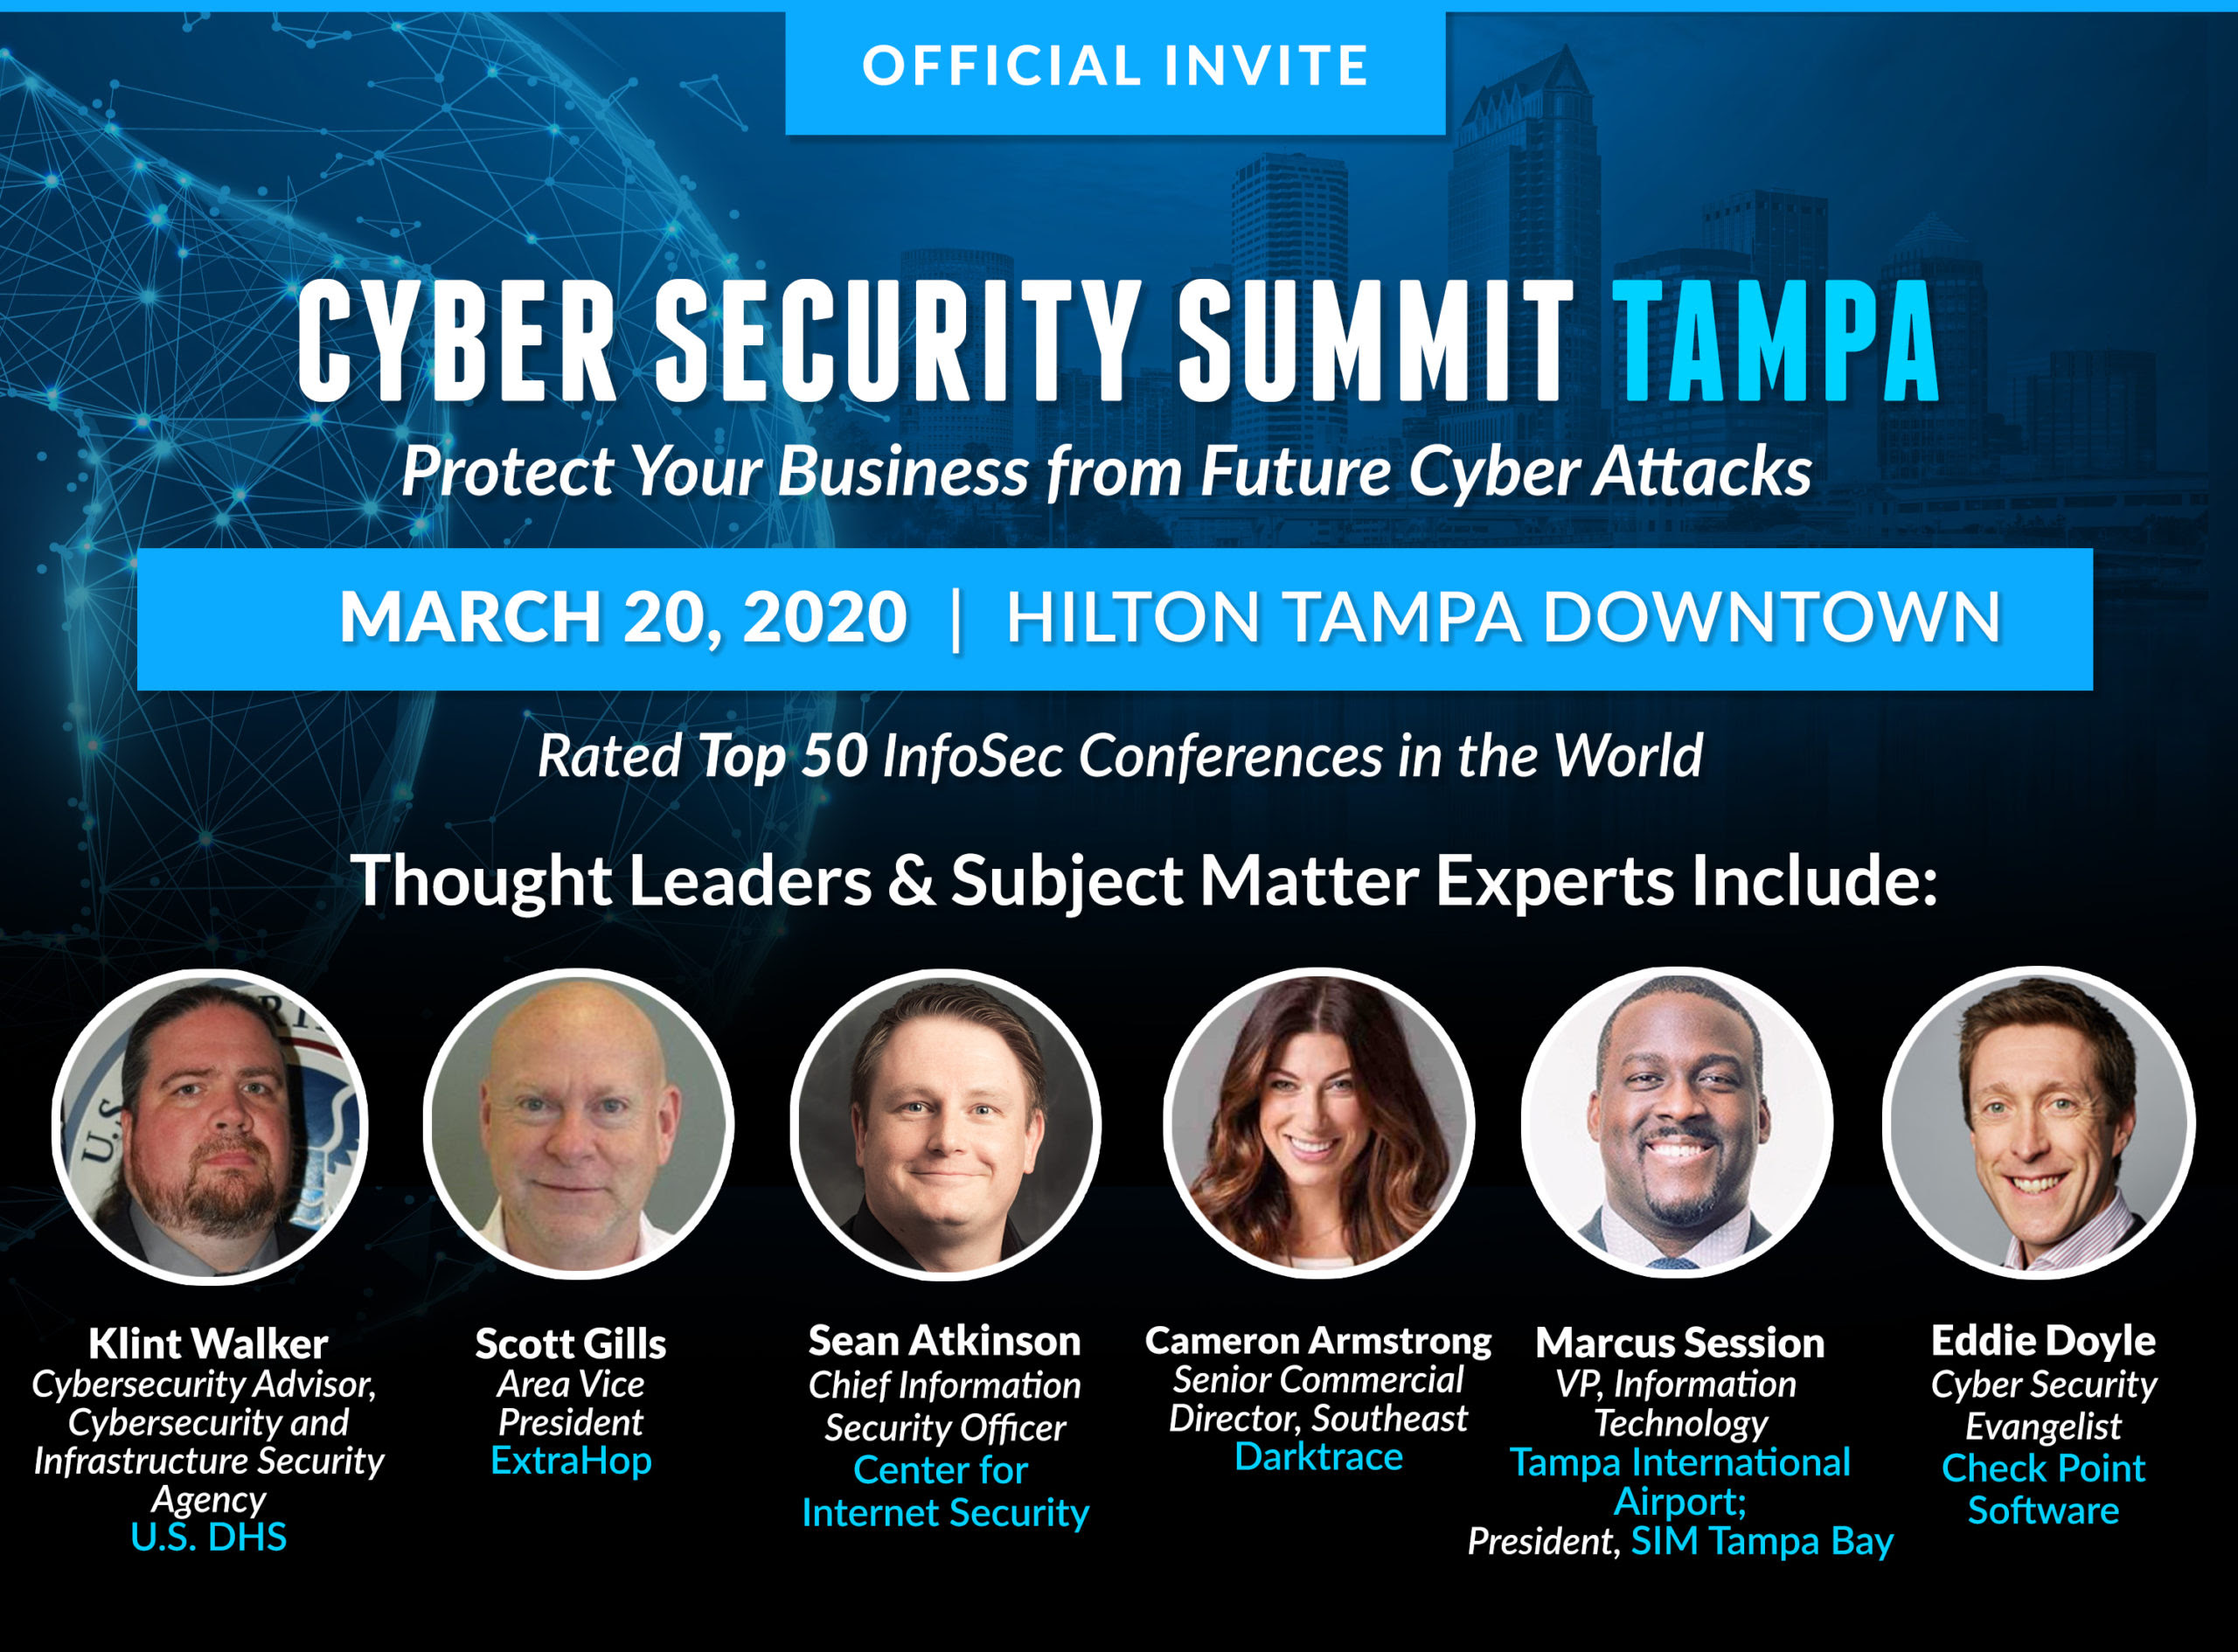 Cyber Security Summit Tampa - Mar. 20, 2020